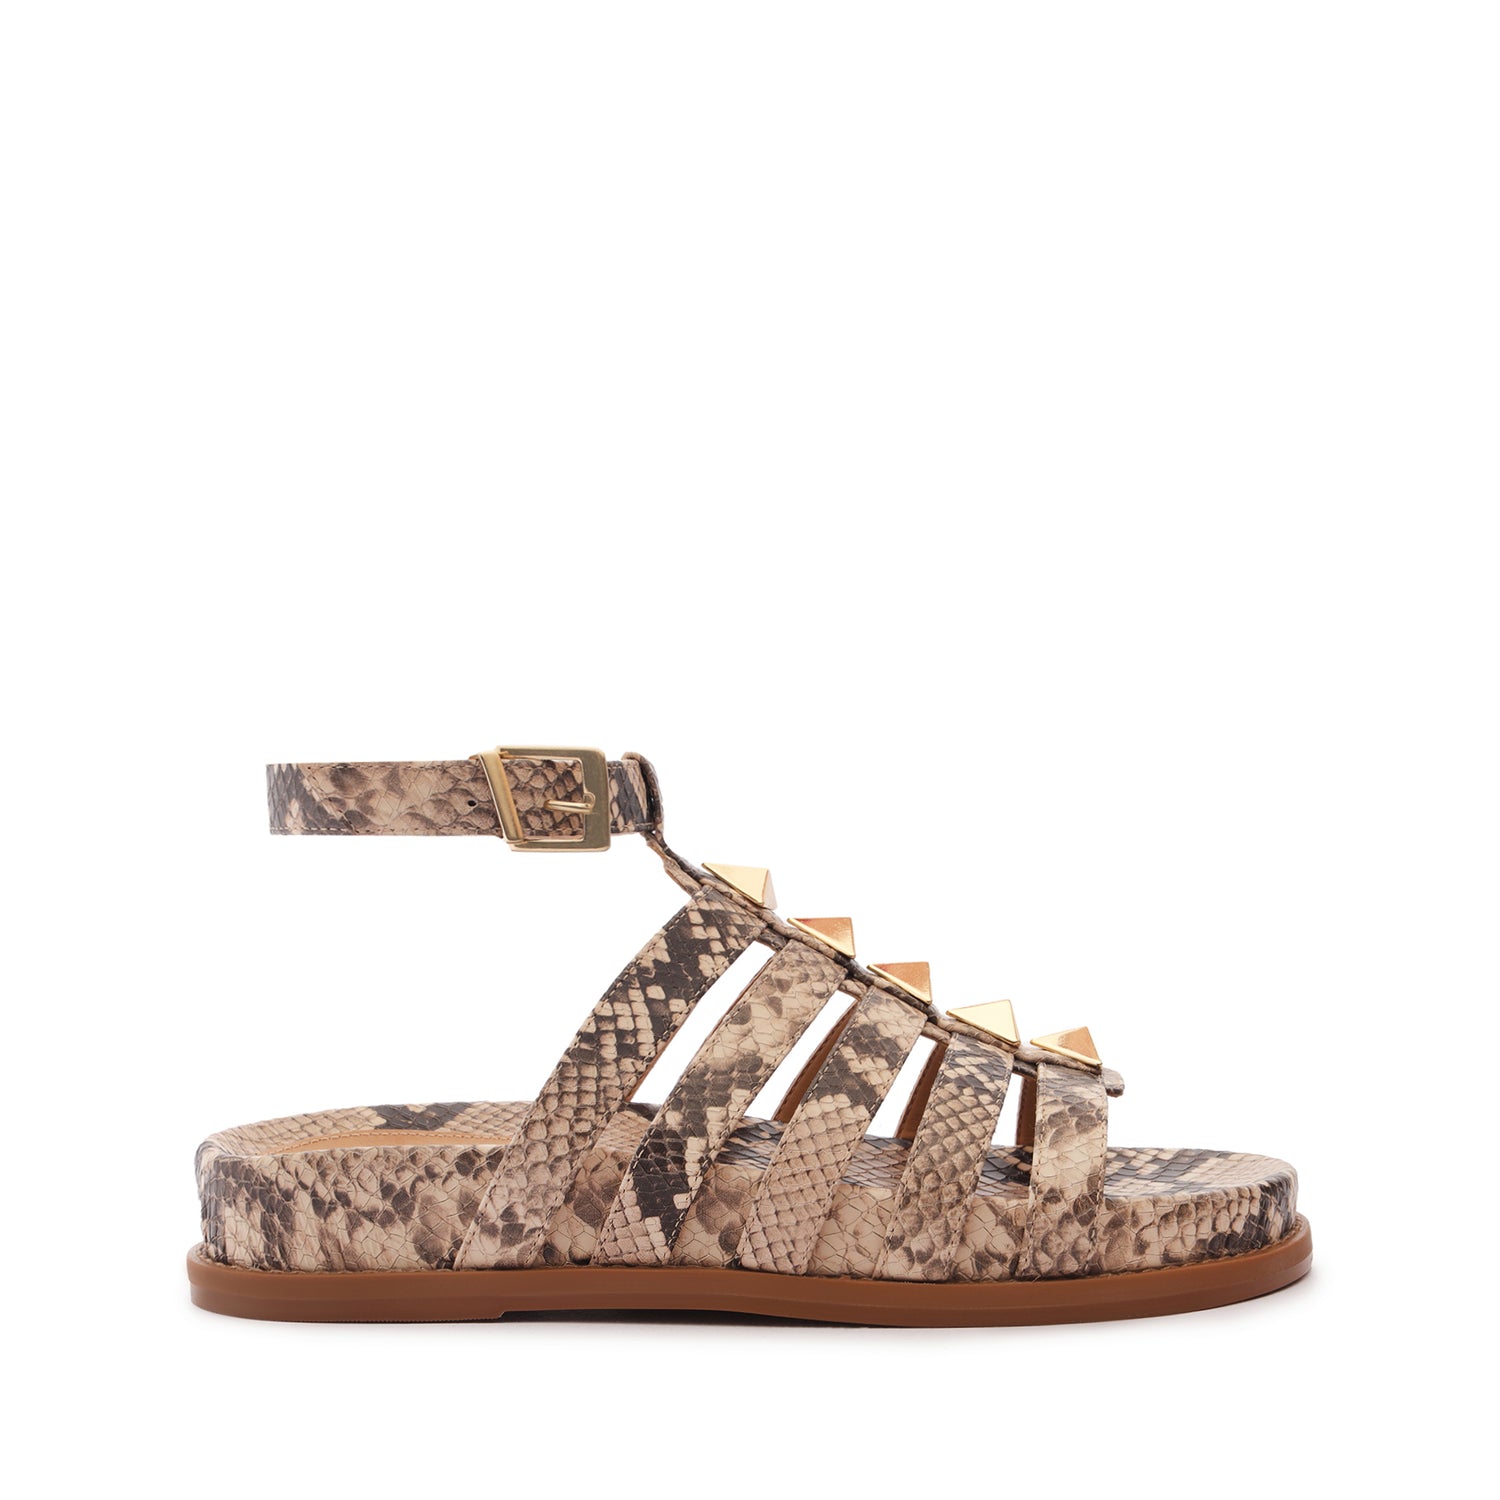 Kyrie Sporty Leather Sandal Flats SPRING 24 5 Natural Lux Leather - Schutz Shoes